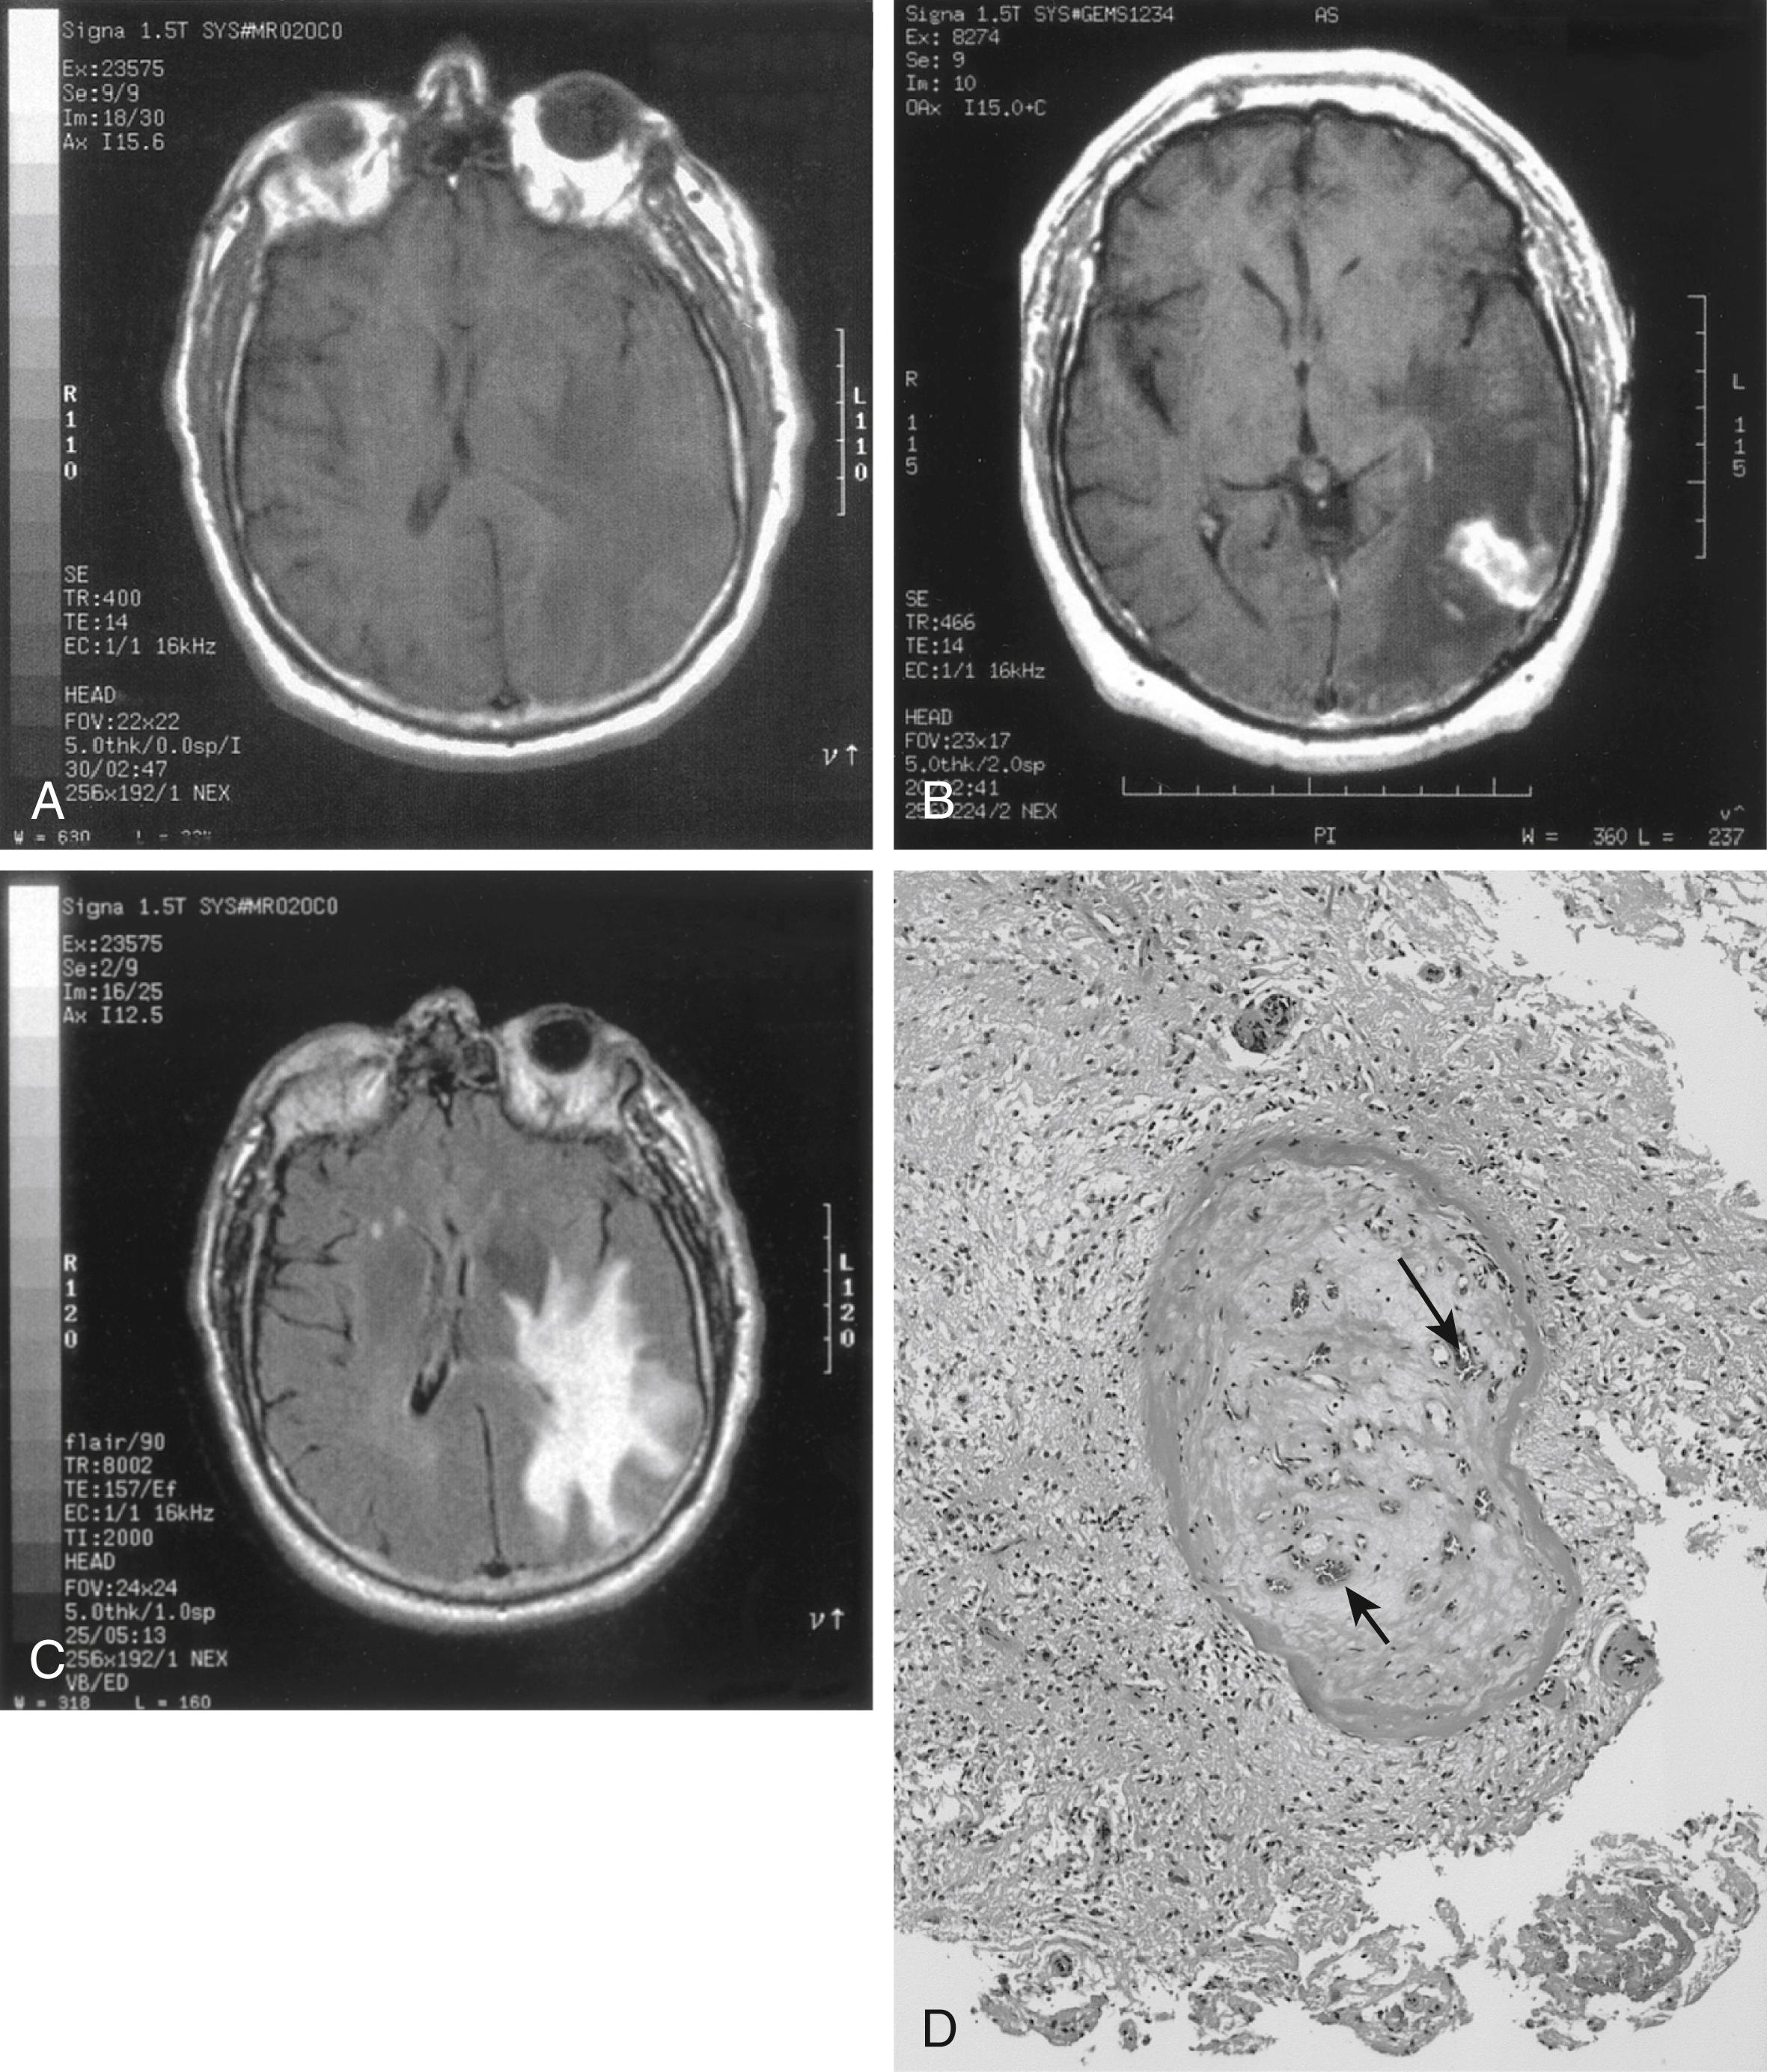 Fig. 36.1, Cerebral vasculitis manifesting as a mass lesion. T1-weighted magnetic resonance (MR) images before (A) and after (B) administration of contrast agent, showing the enhancement of a left temporoparietal mass lesion. (C) T2-weighted MR image showing extensive edema around the lesion. (D) Pathologic specimen from brain biopsy demonstrates an intraparenchymal blood vessel with chronic occlusive changes, mural fibrosis, and recanalization by small, thin-walled vessels (arrows) . The gray matter surrounding the blood vessel shows extensive gliosis and loss of neurons. Leukocytes, primarily lymphocytes, infiltrate the arterial adventitia and, to a lesser extent, the media—findings that are consistent with a chronic vasculitic process.